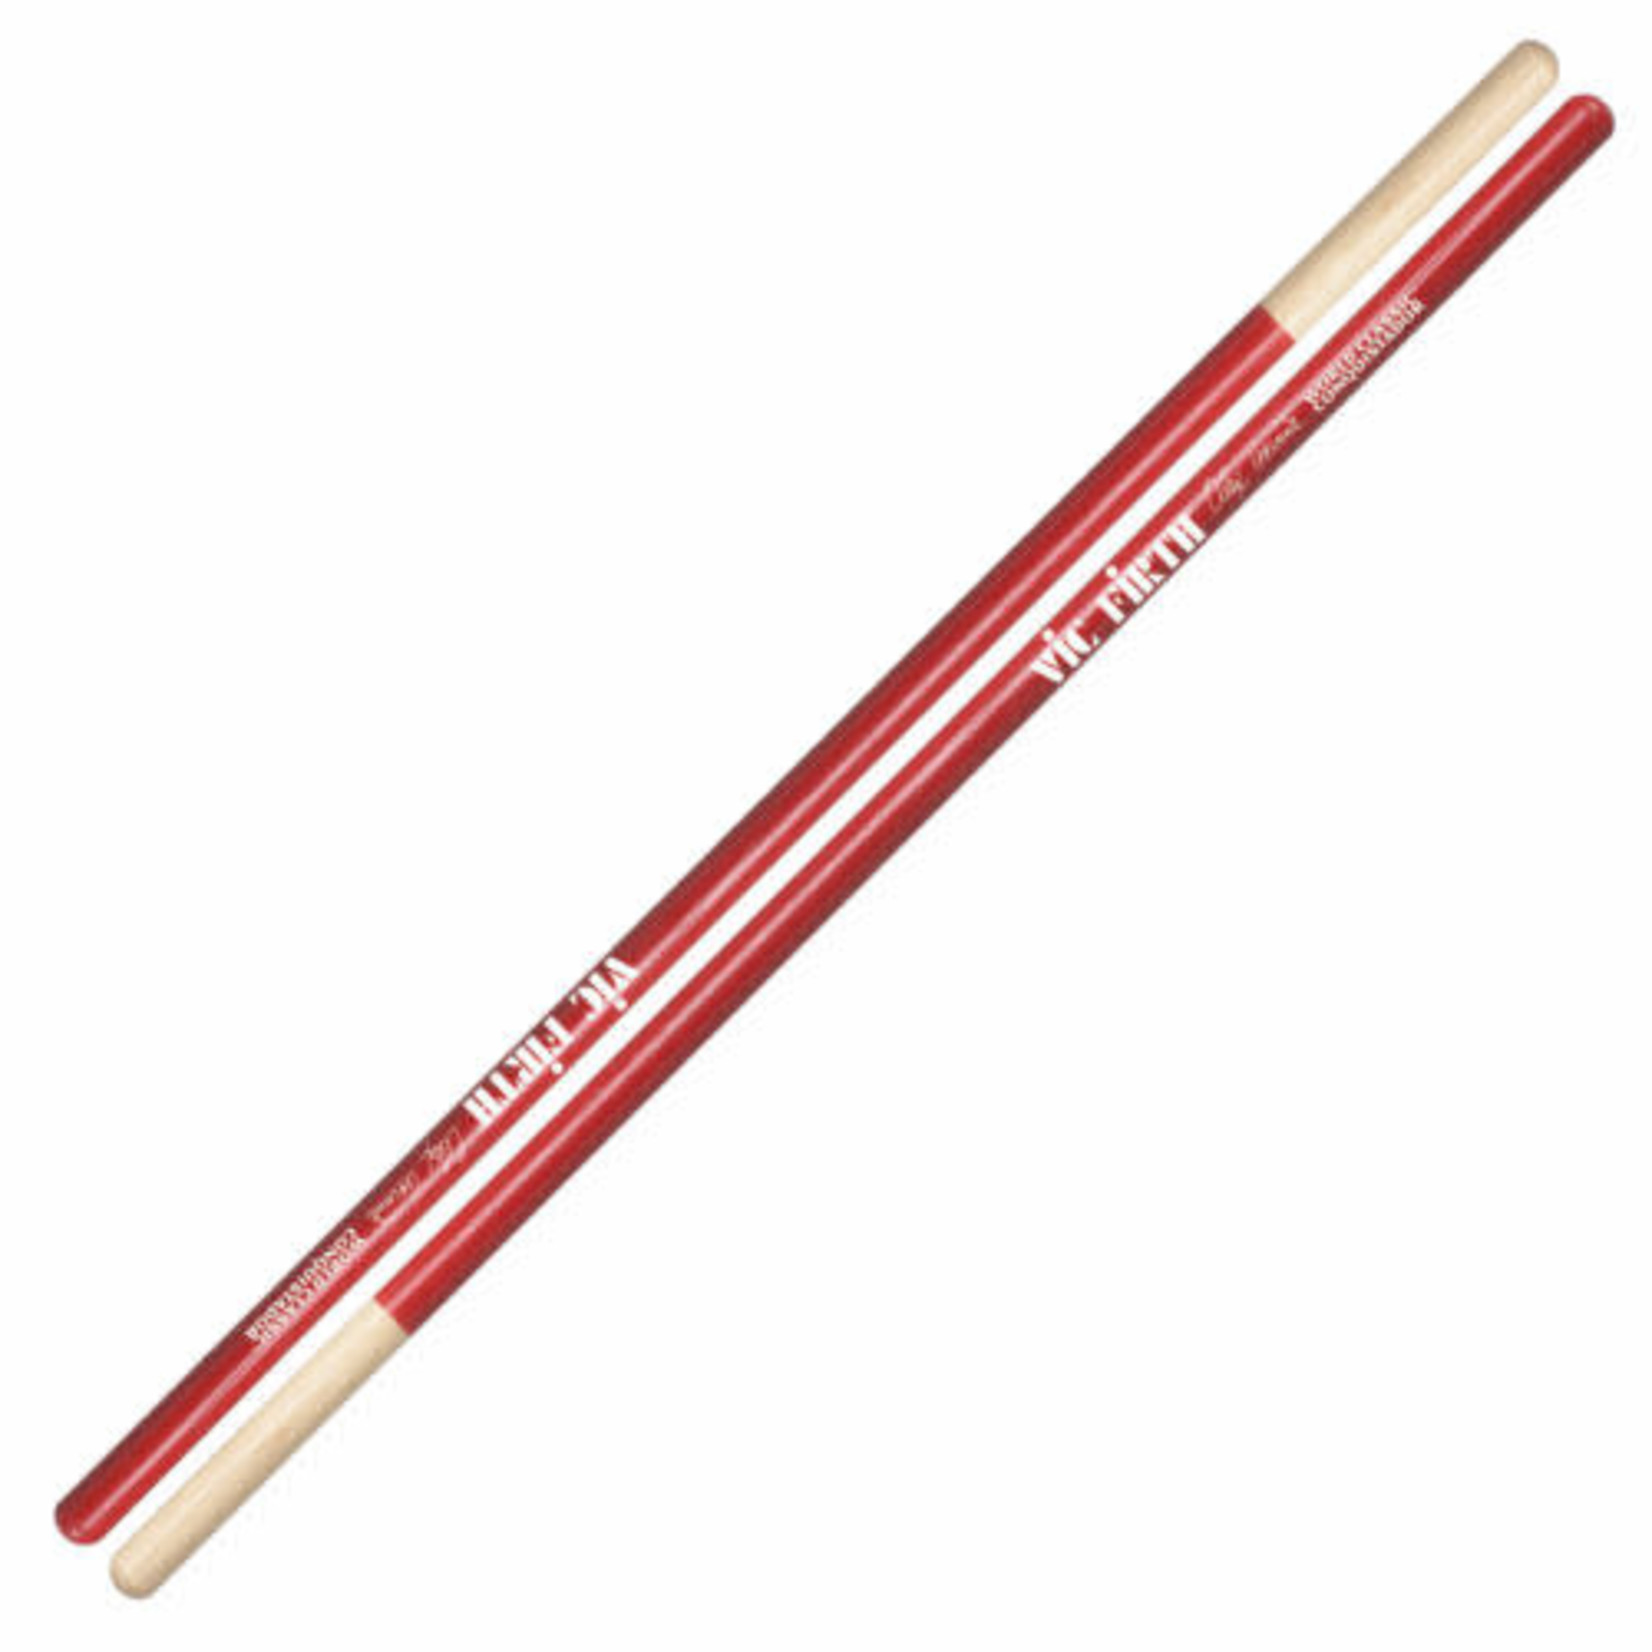 Vic Firth Vic Firth Acuna Conquistador Timbale Sticks